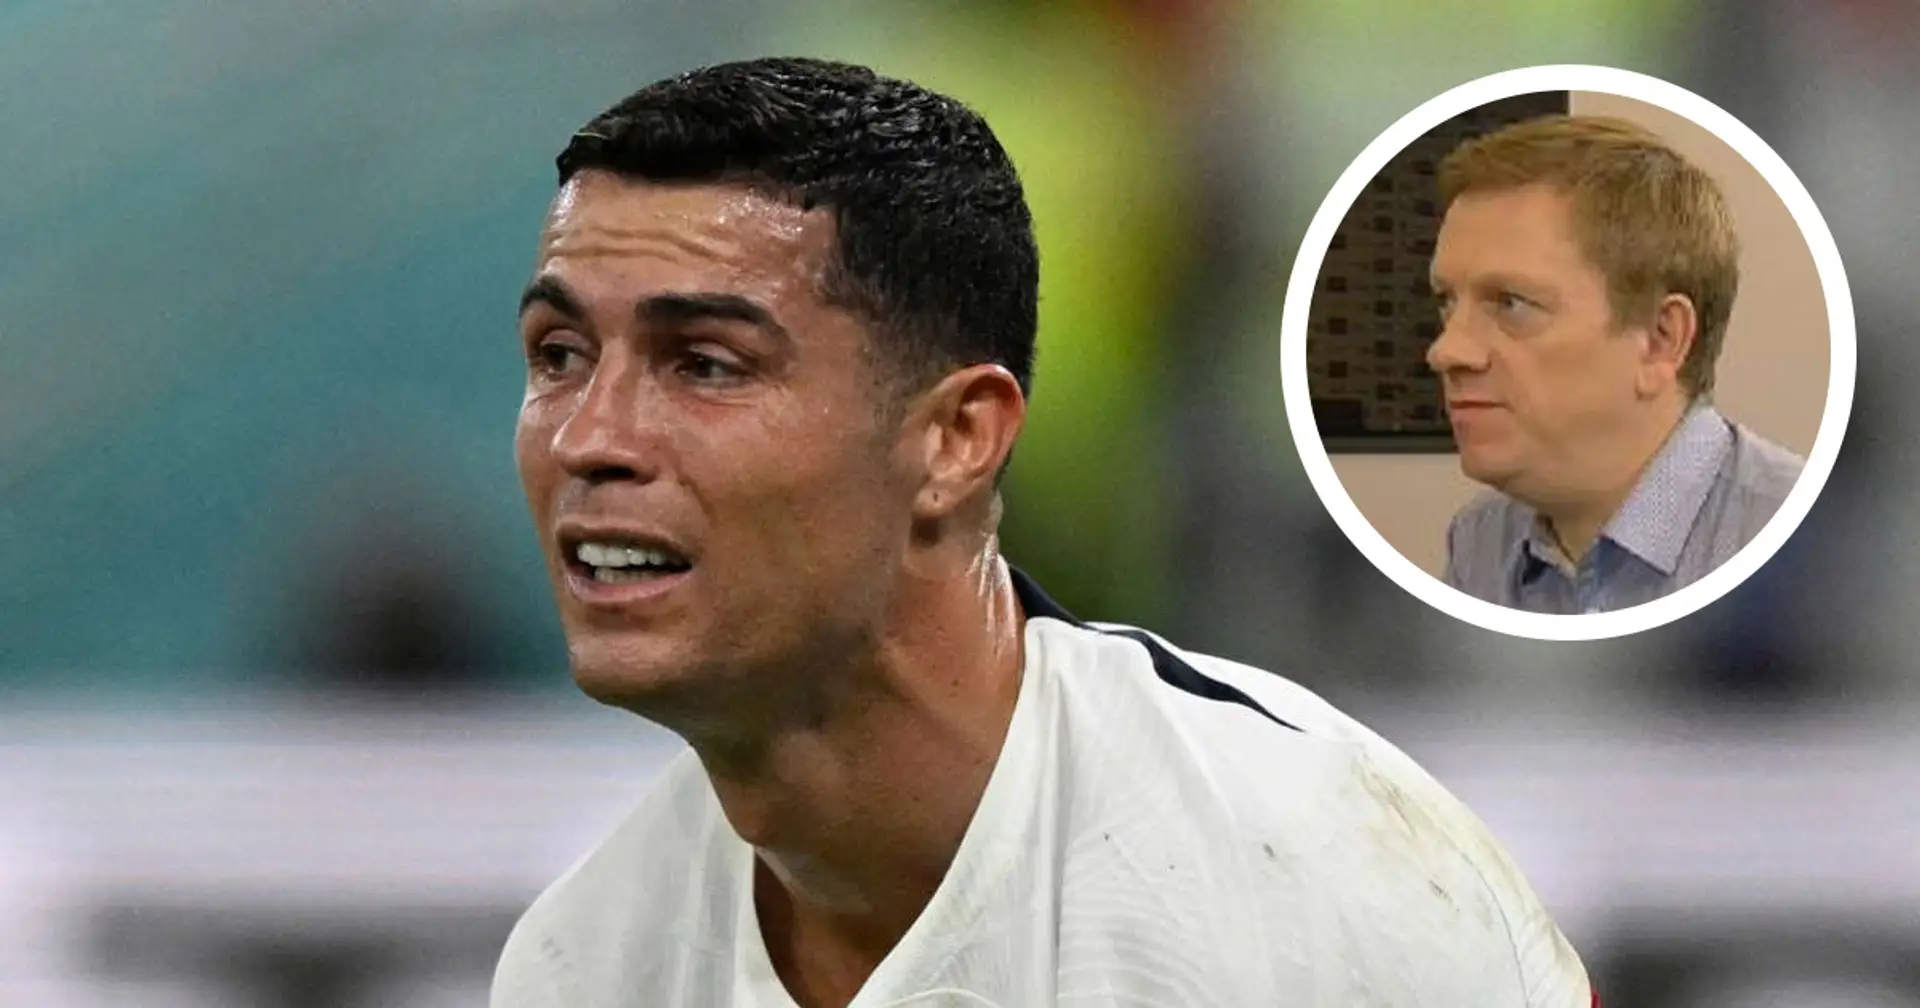 'I feel a bit sorry for him. He's been one of the greats': Daily Mail columnist reflects on Ronaldo's World Cup disaster